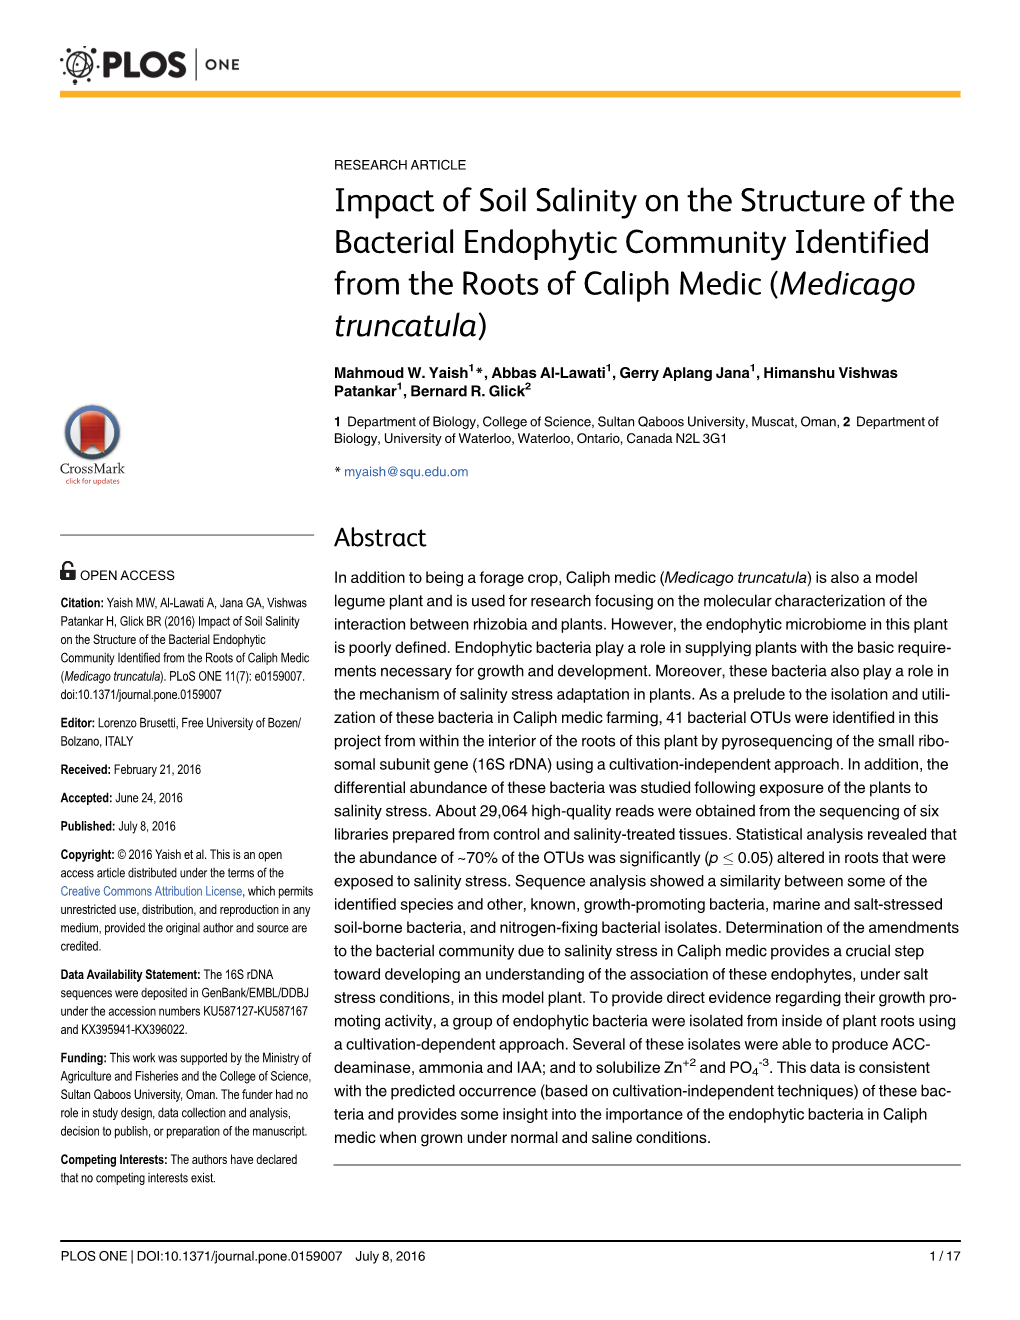 Impact of Soil Salinity on the Structure of the Bacterial Endophytic Community Identified from the Roots of Caliph Medic (Medicago Truncatula)